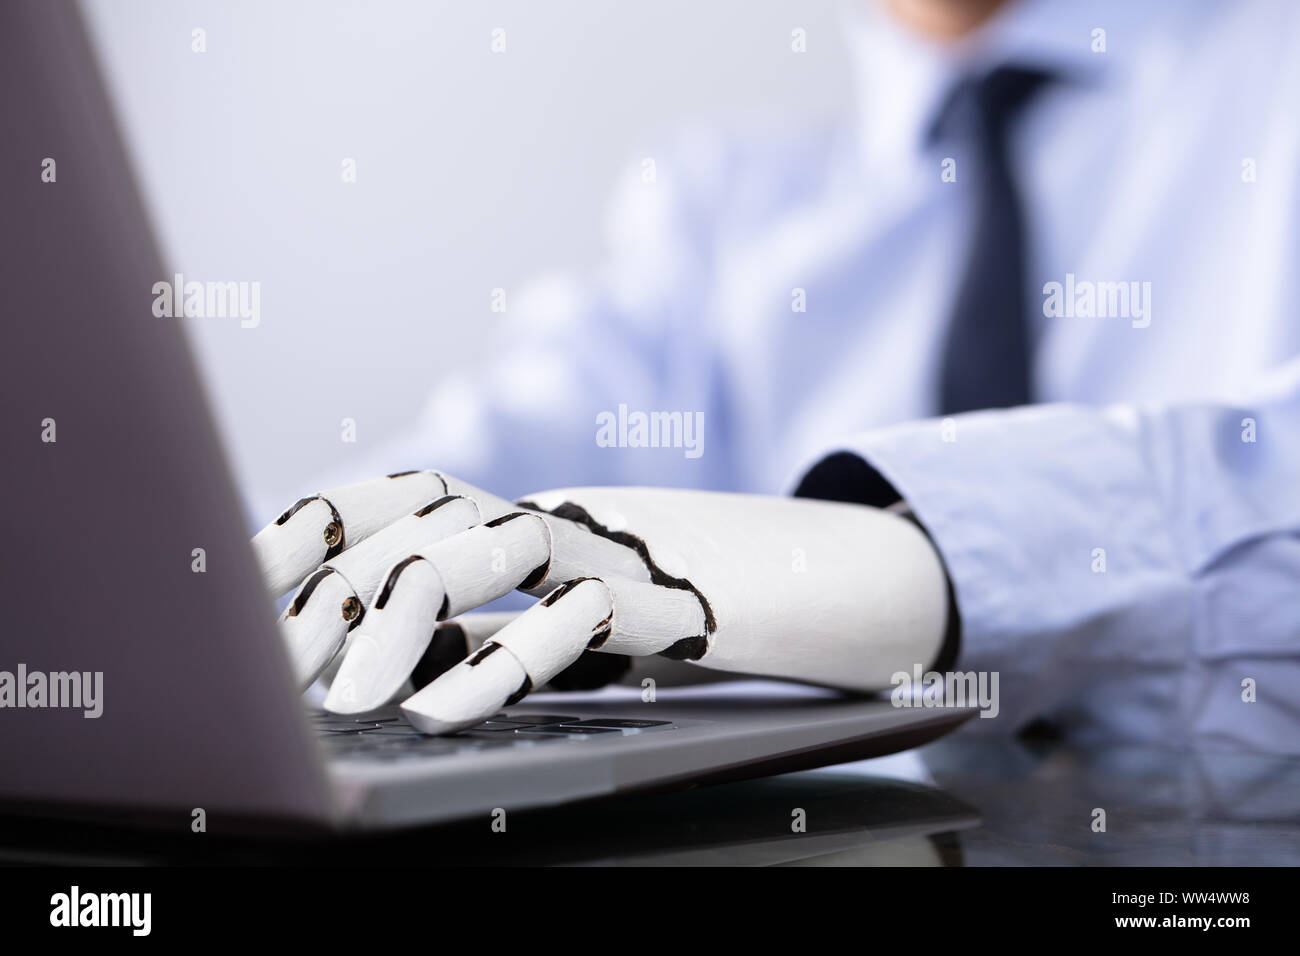 Man With Prosthetic Hand Working On Laptop. Artificial Limb Stock Photo